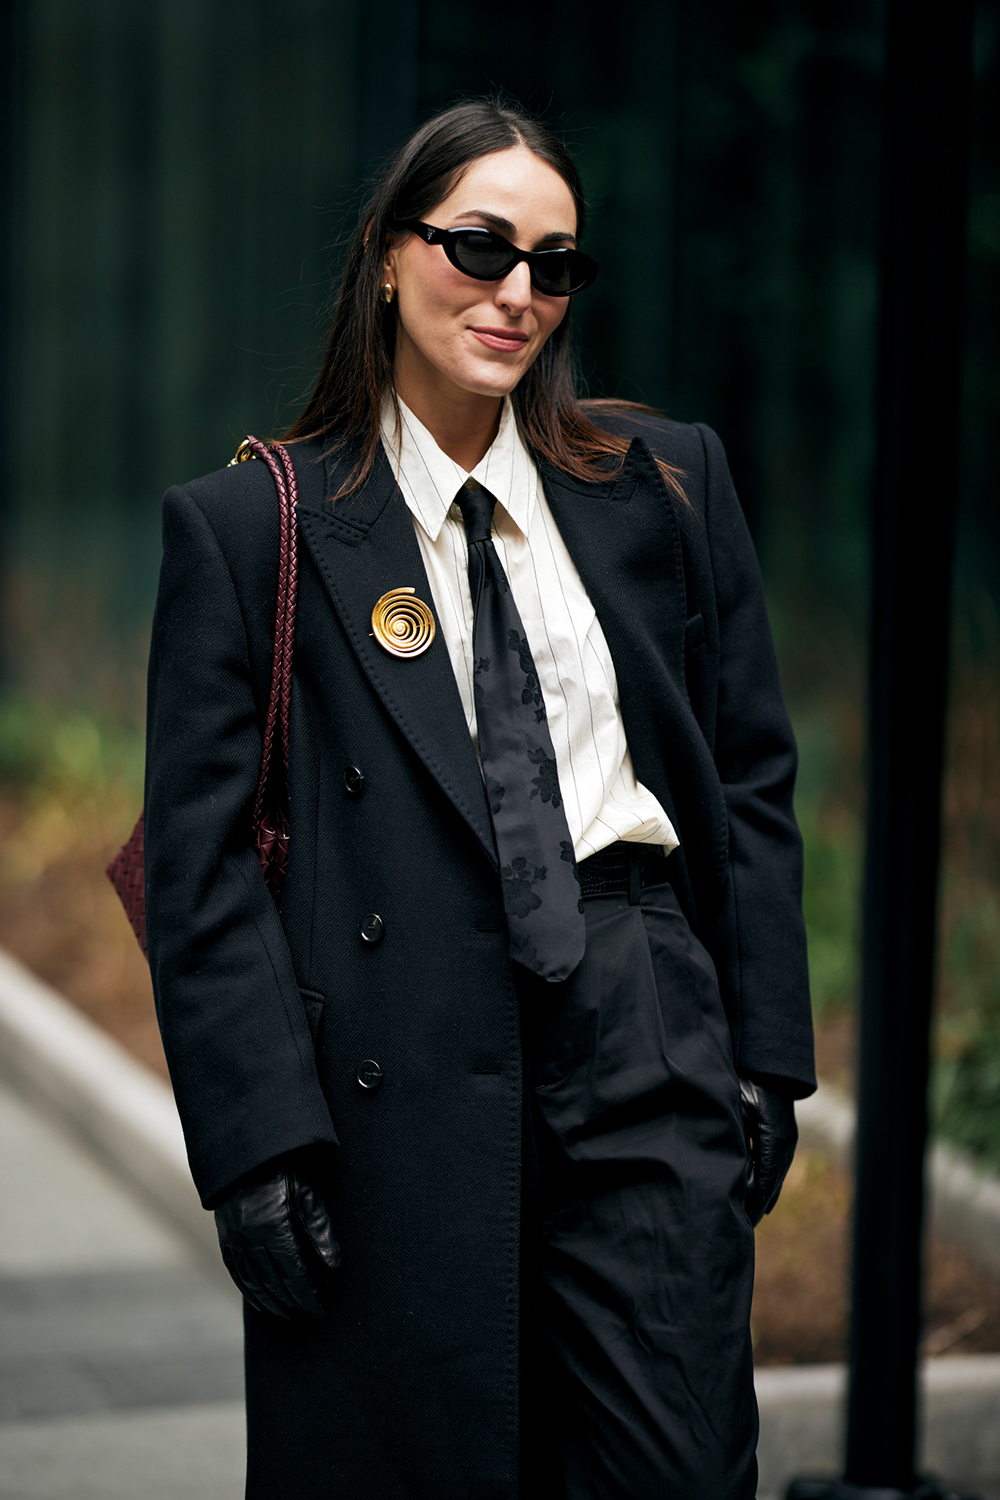 Street Style Image with Brooch